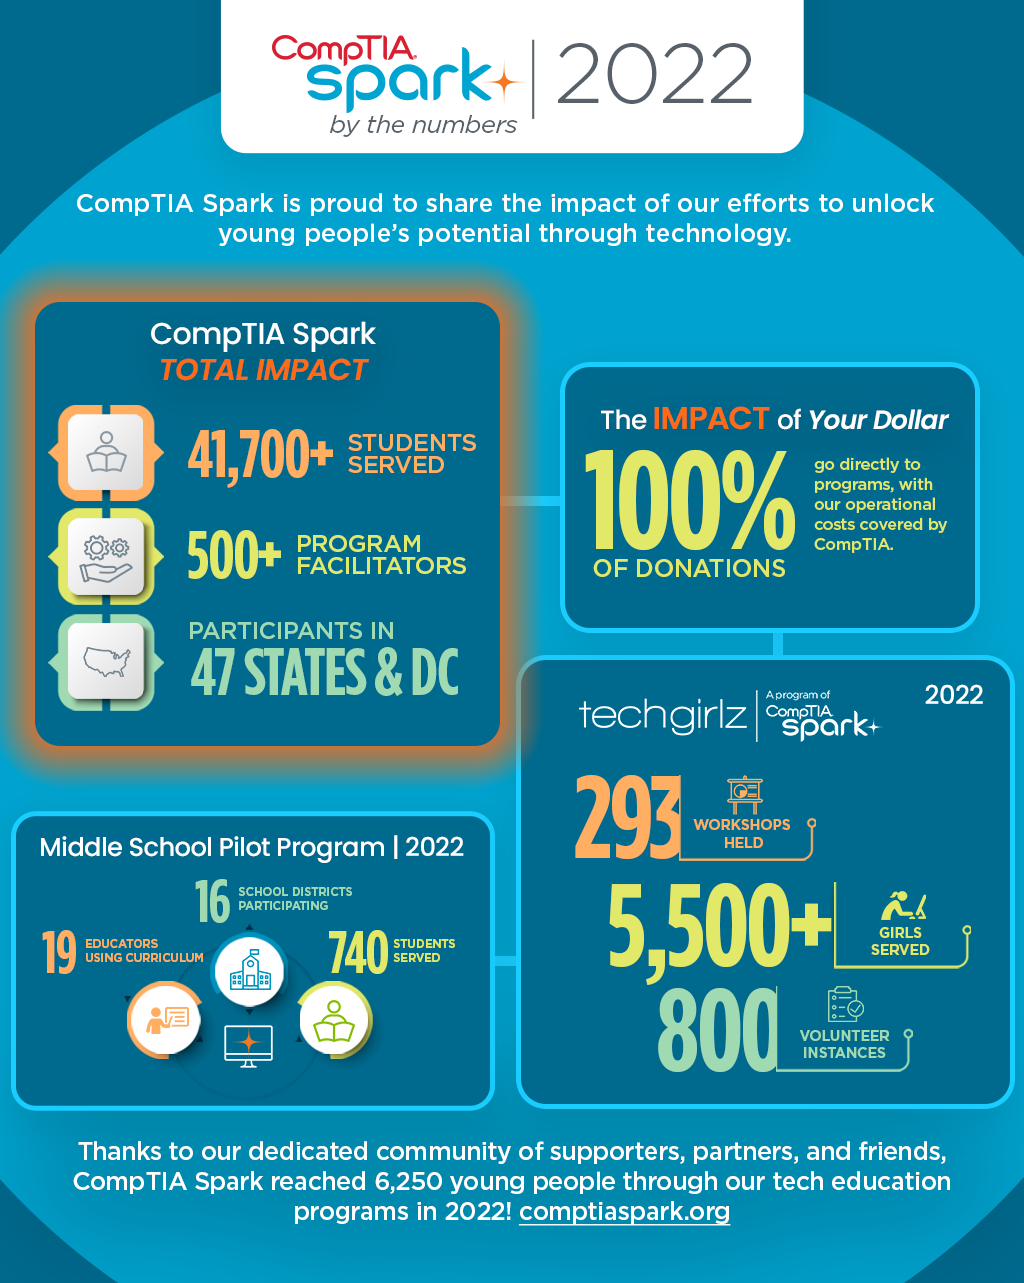 CompTIA Spark shares impact highlights from 2022.